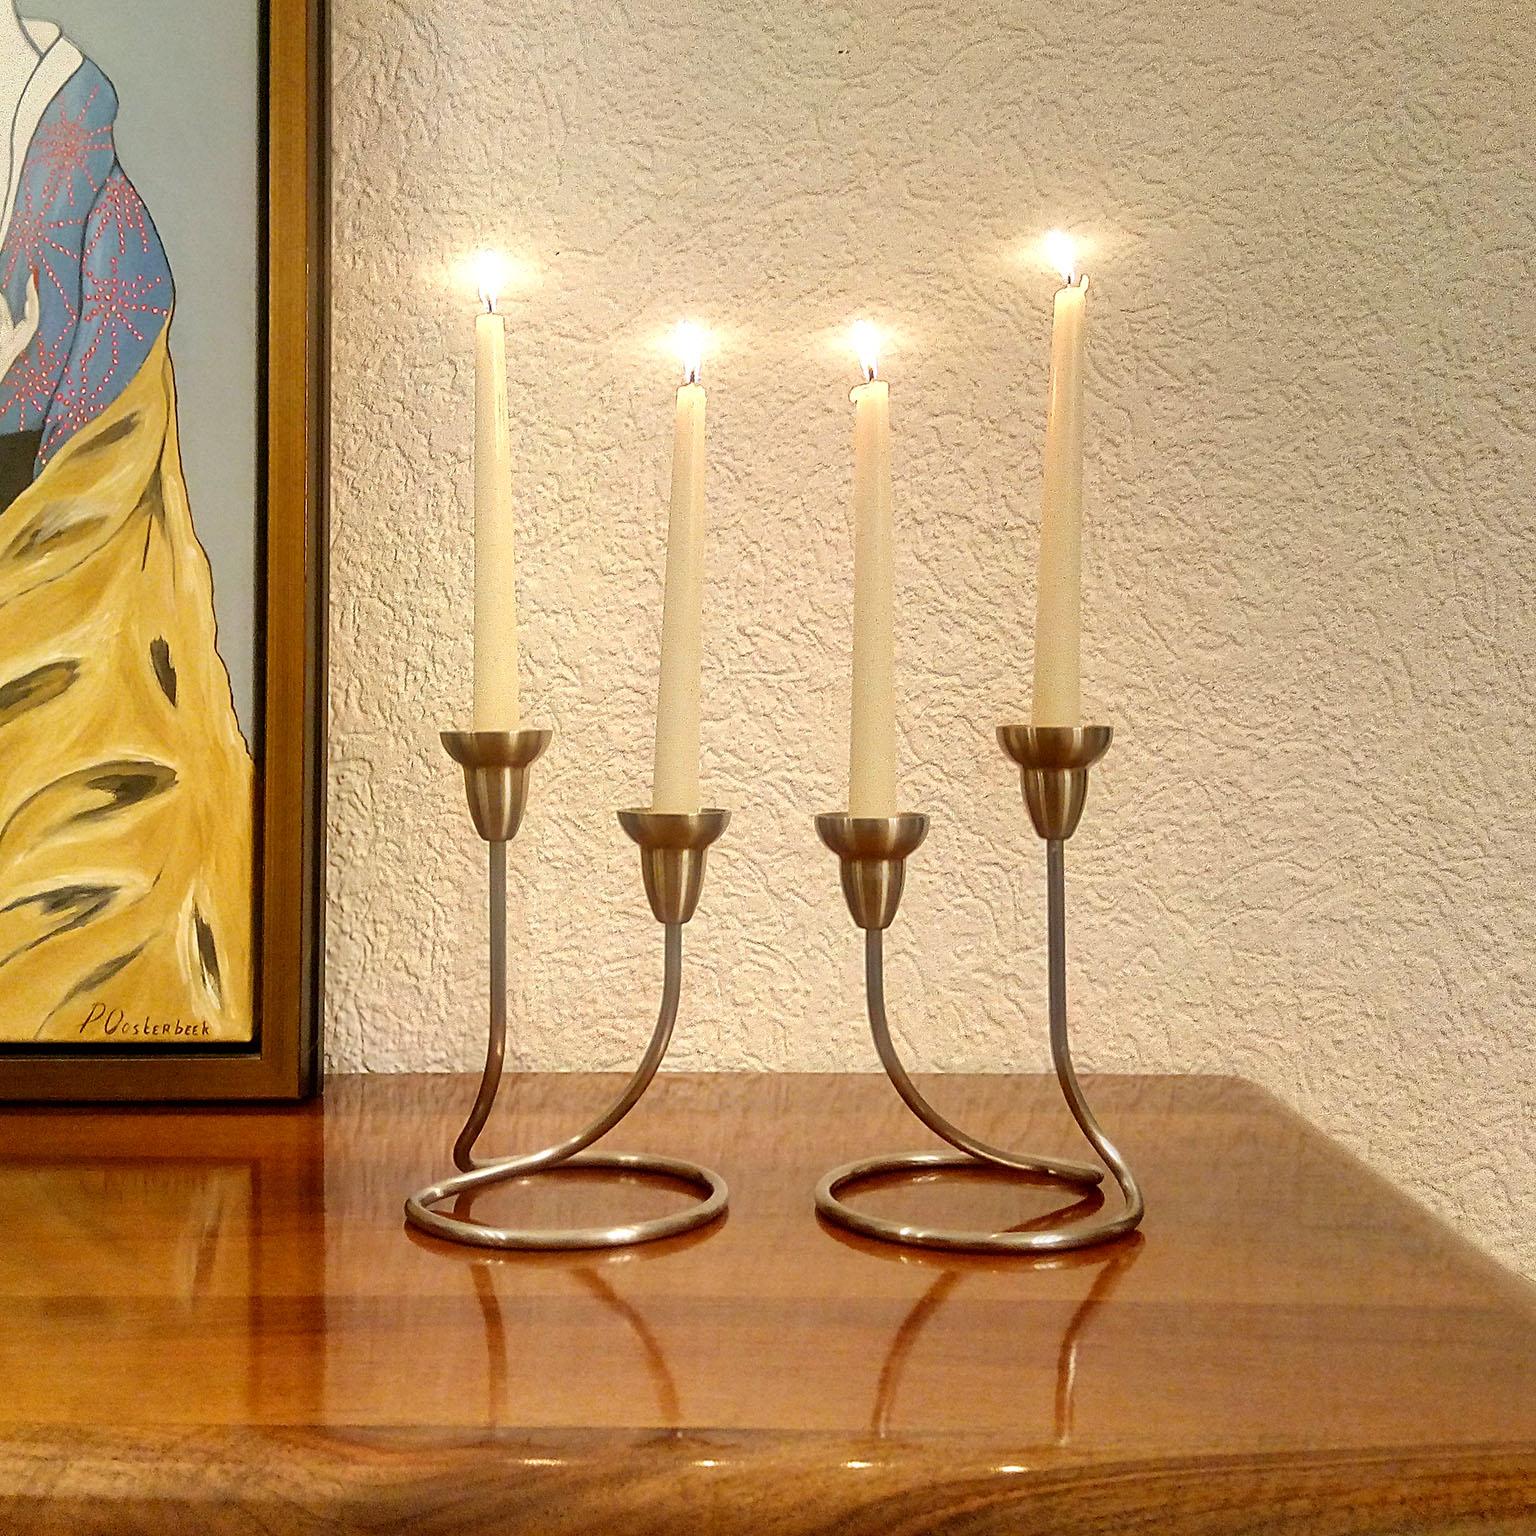 Swing candleholders by Georg Jensen
Beautiful pair of candle holders made of satin polished stainless steel. Marked 